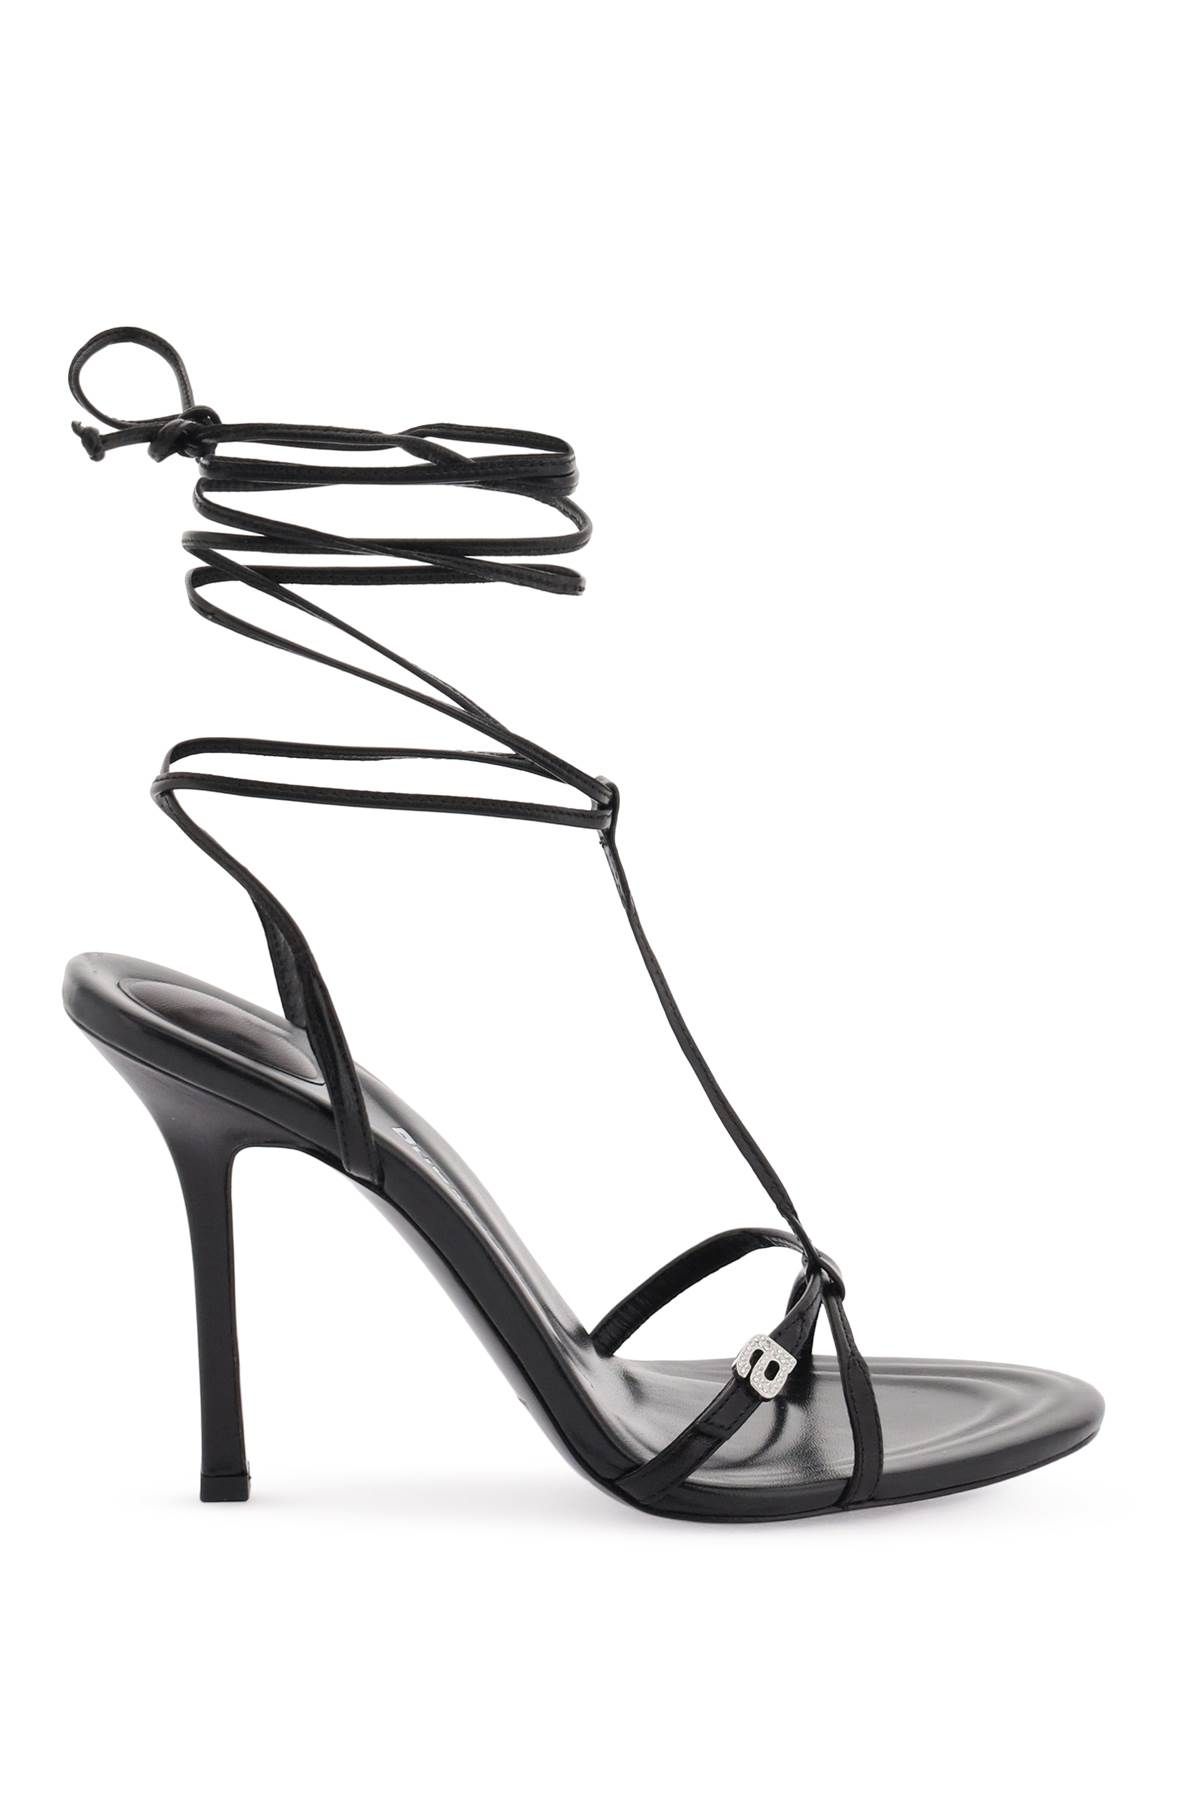 ALEXANDER WANG 'LUCIENNE' LEATHER SANDALS